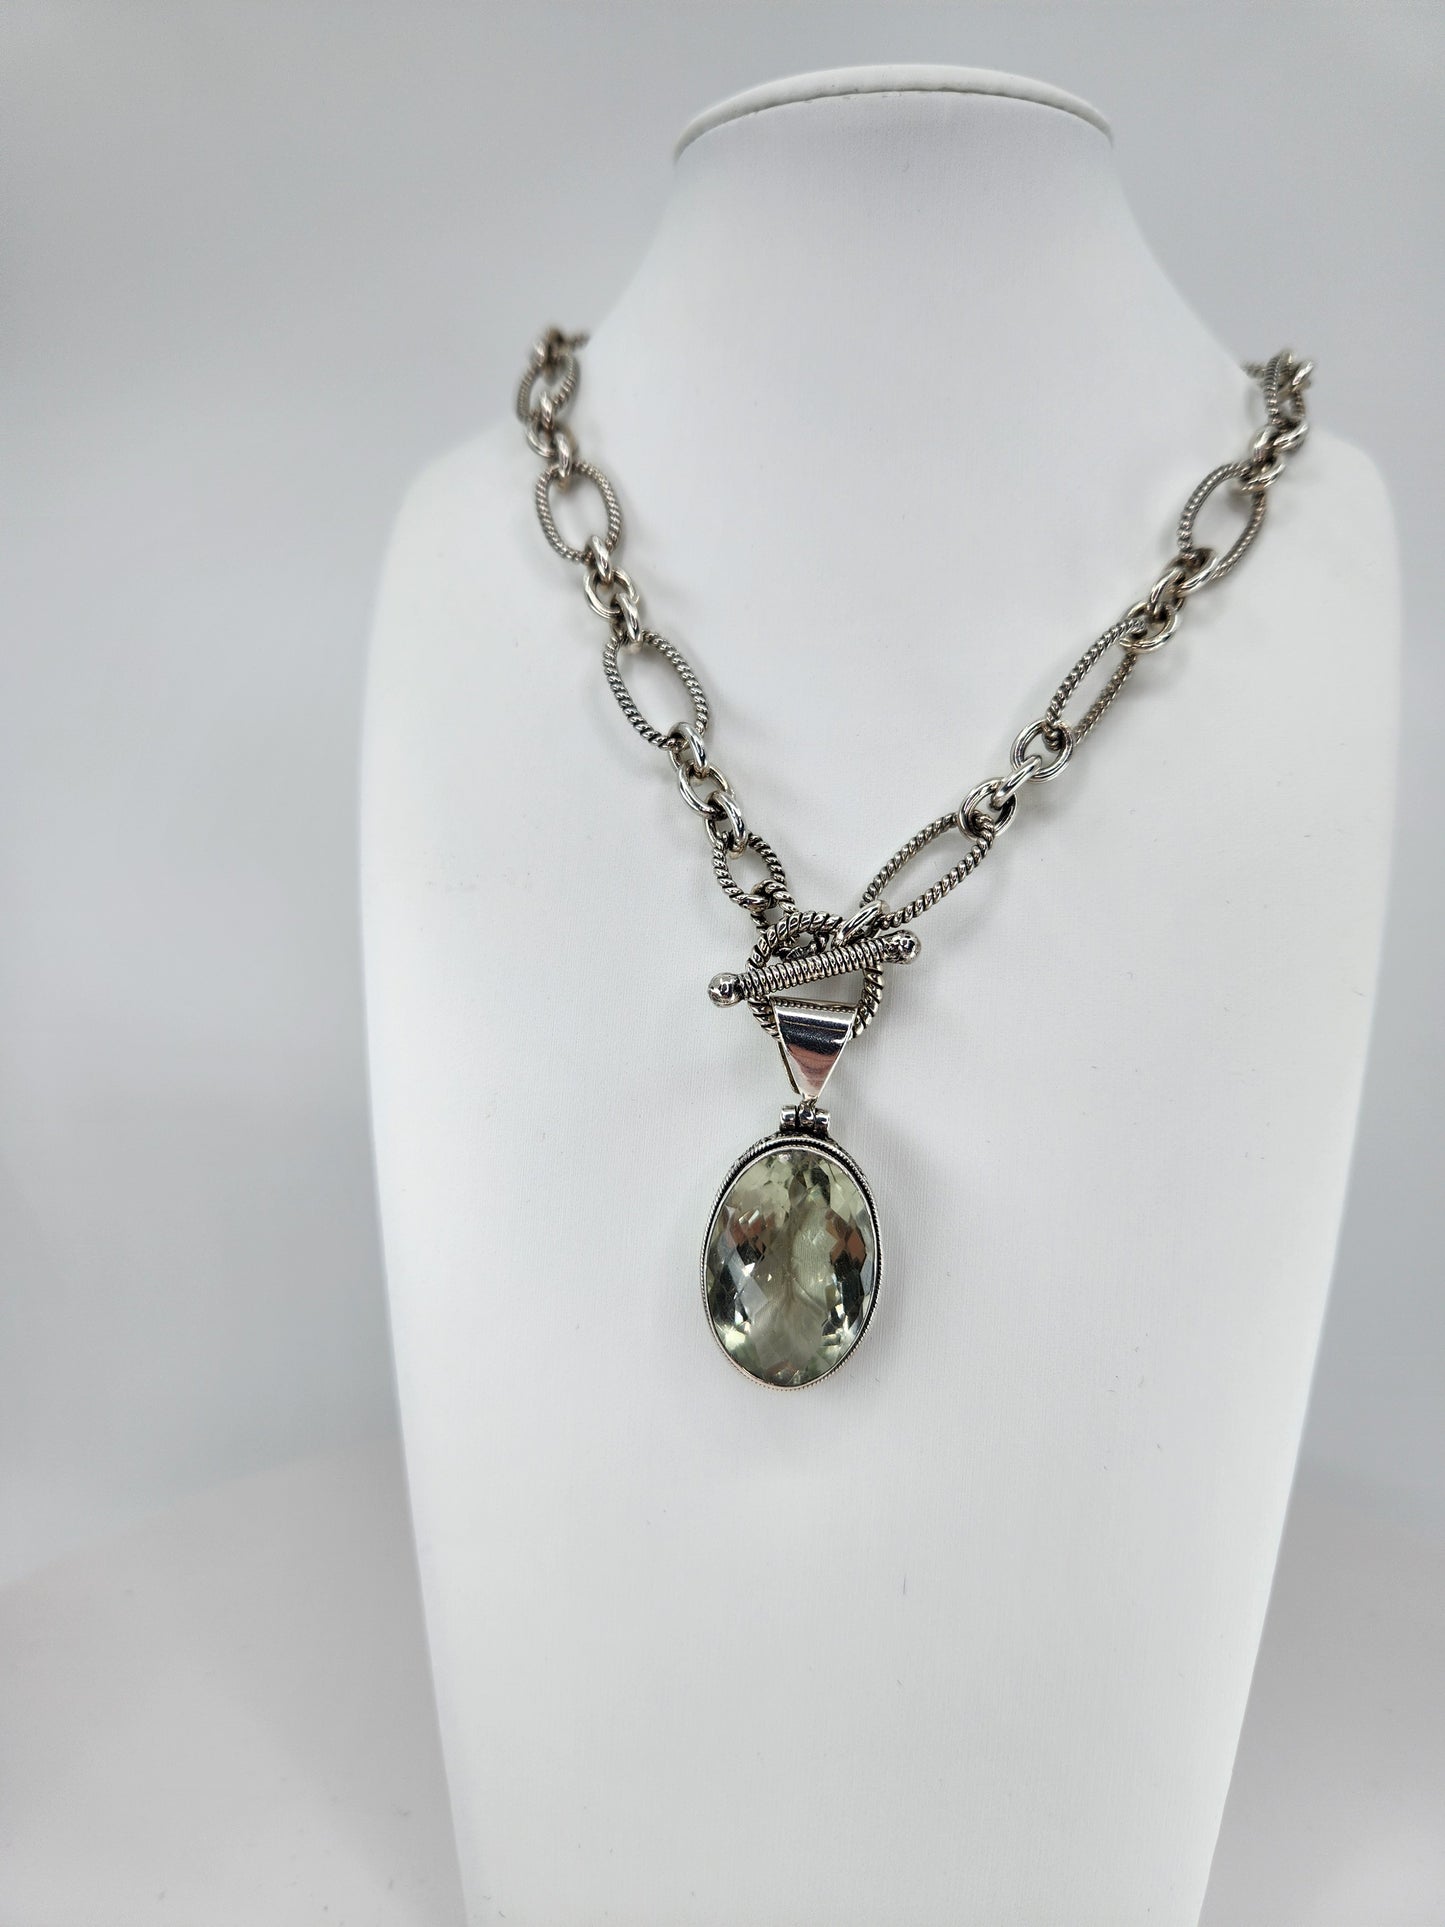 Janice Carson - Green Amethyst Round Pendant with Sterling Silver Necklace